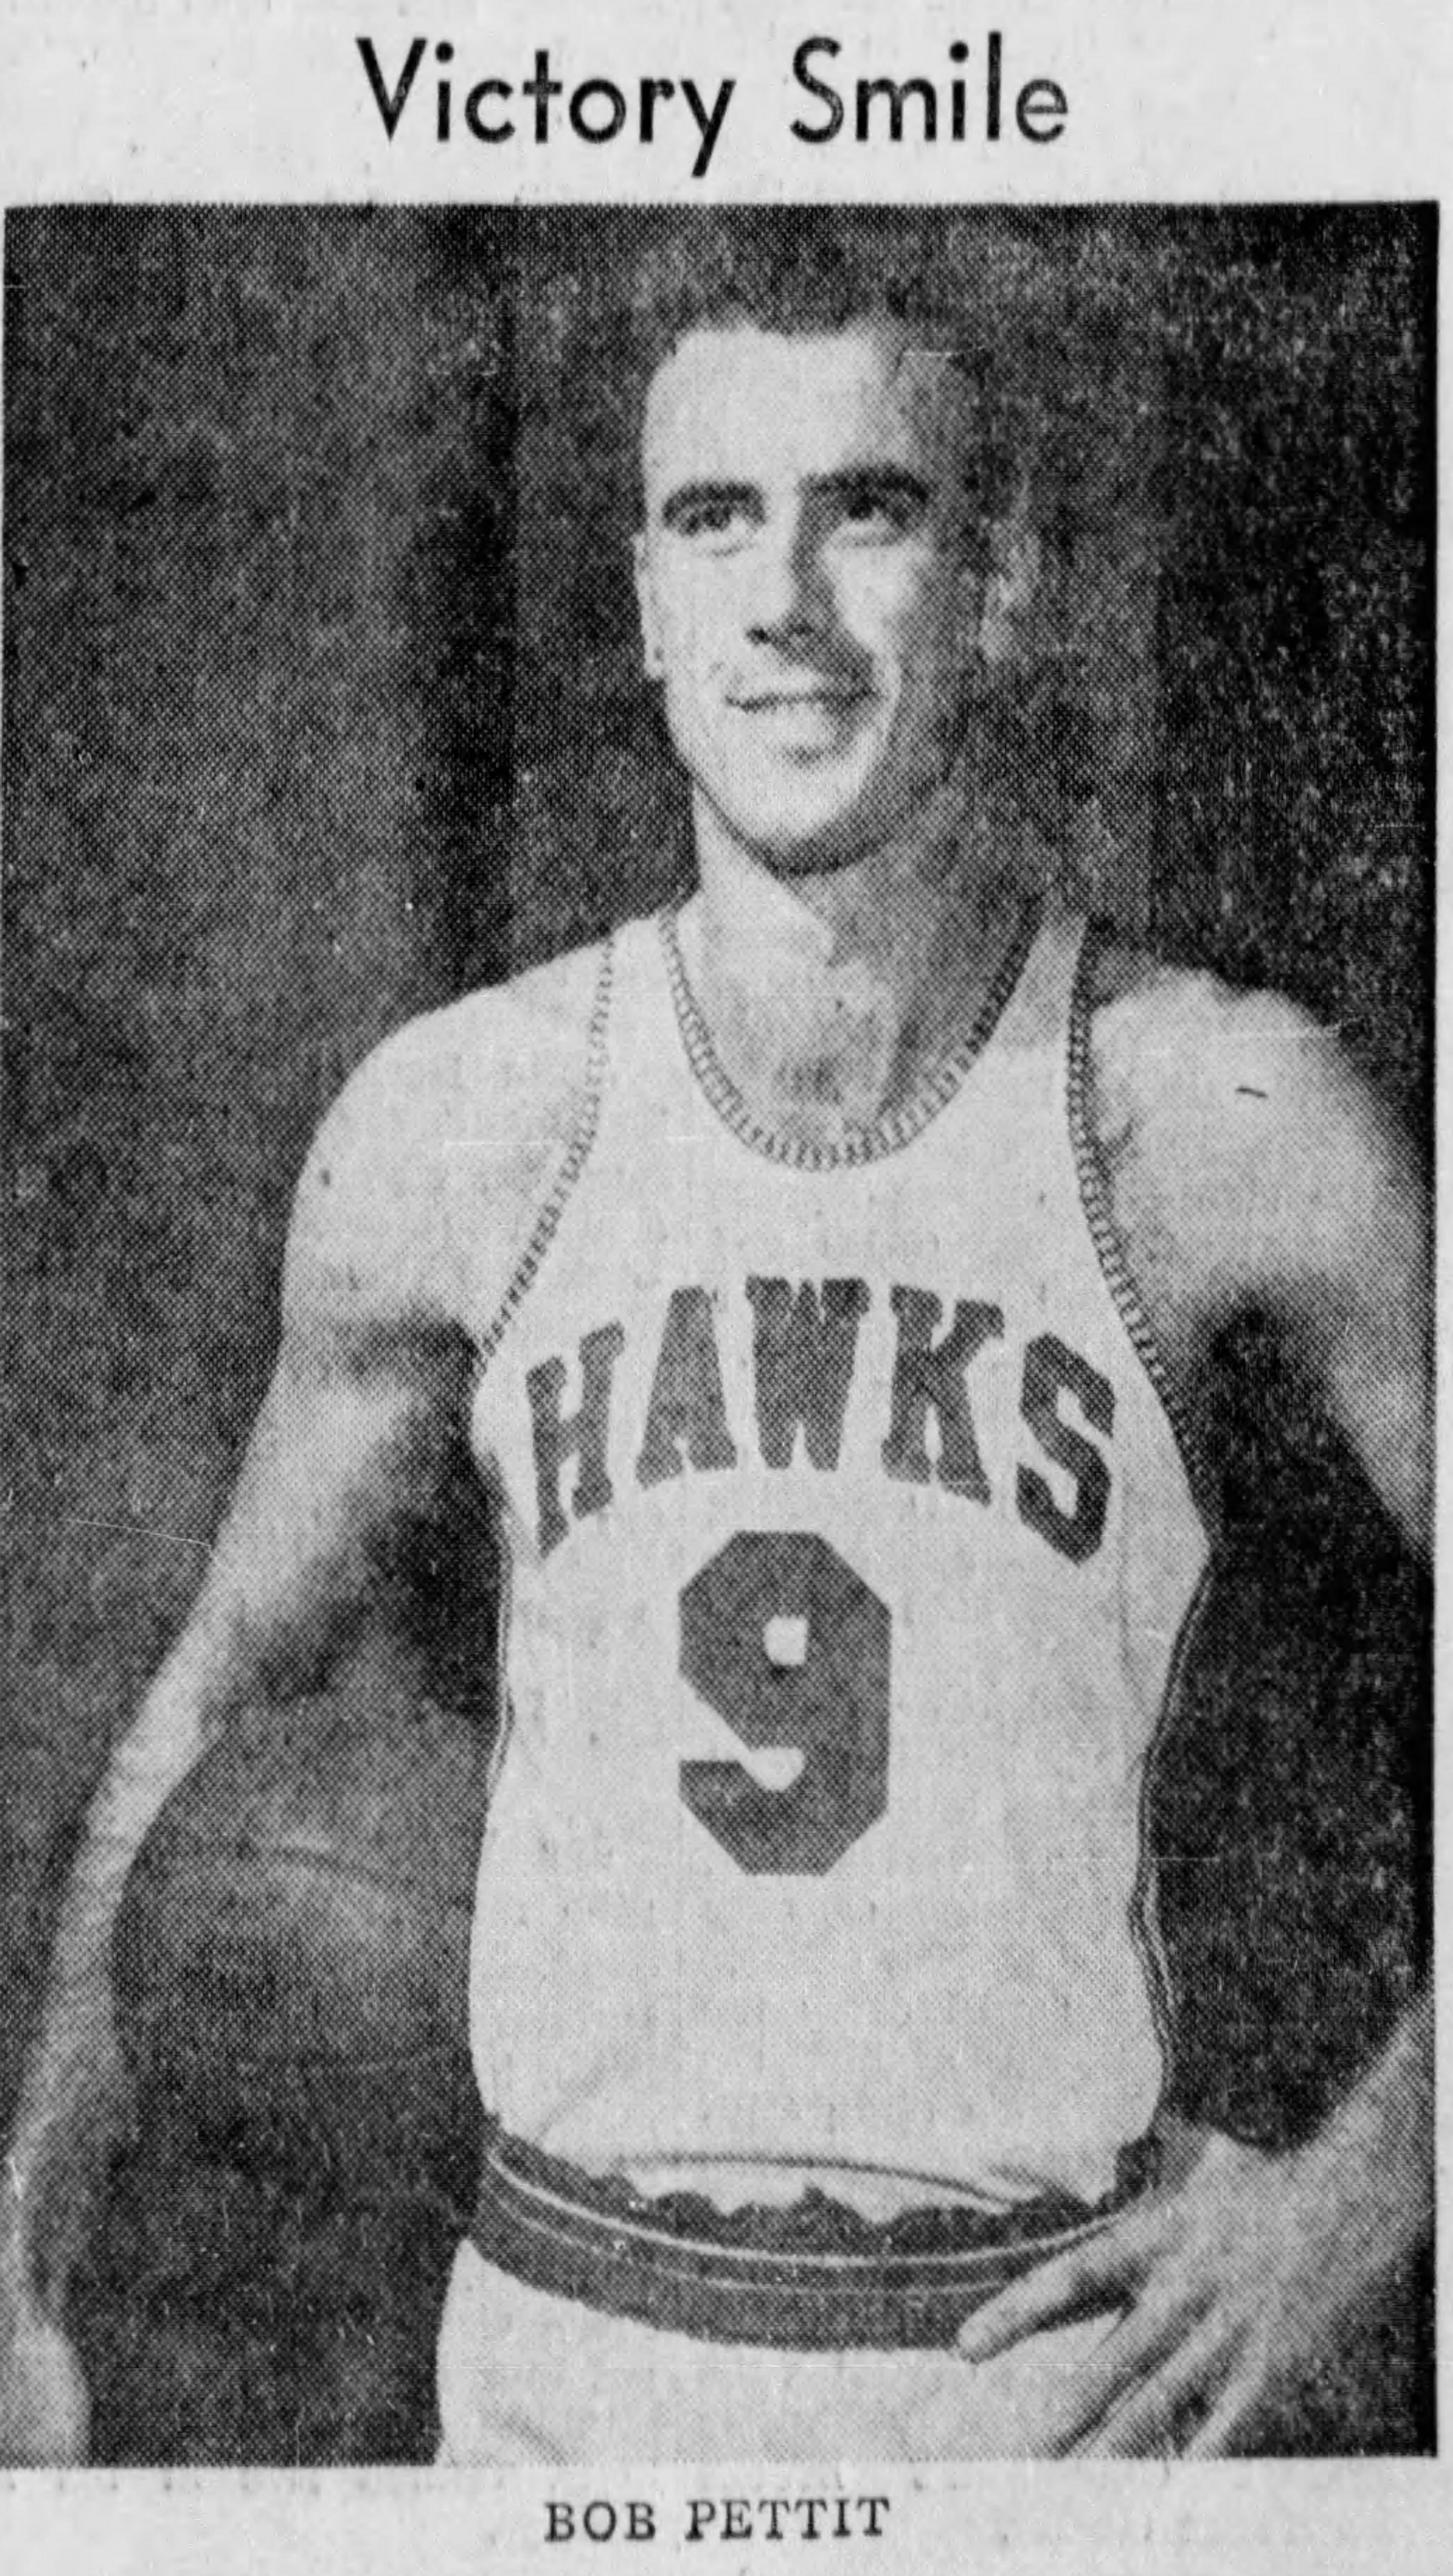 How Bob Pettit brought a championship to St. Louis